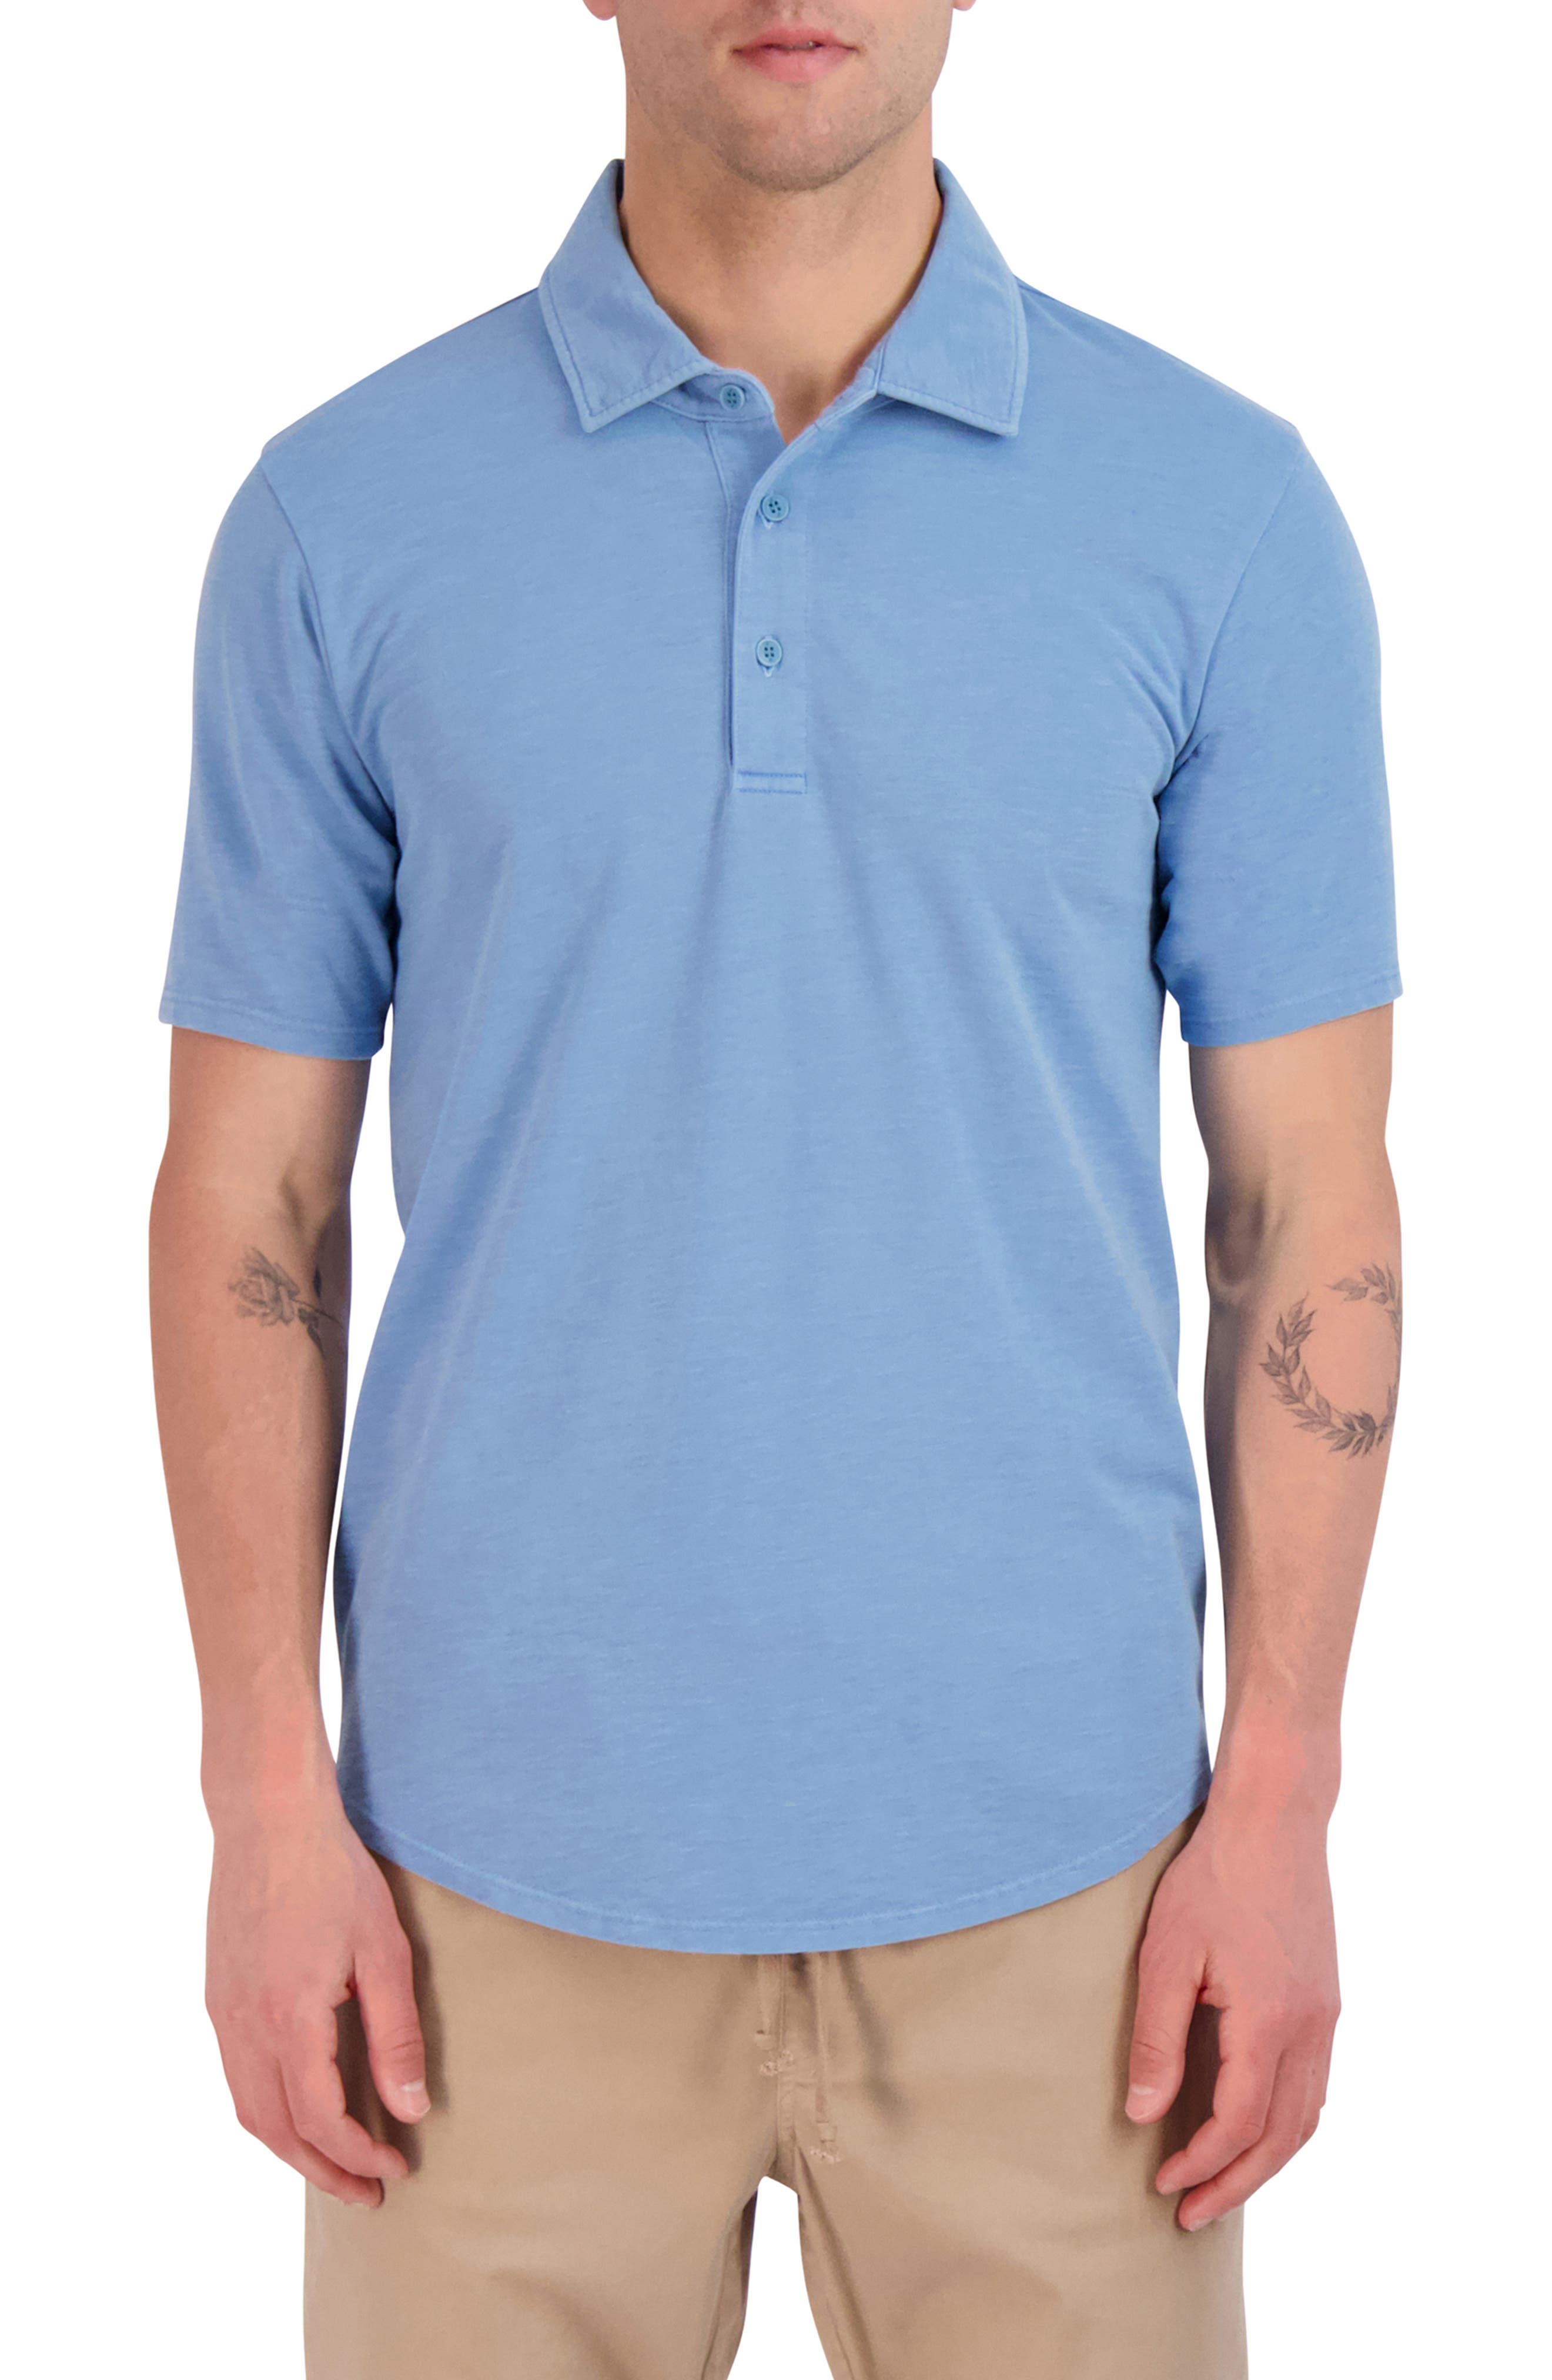 New Mens Bonobos Solid Classic Polo Size Large Blue 